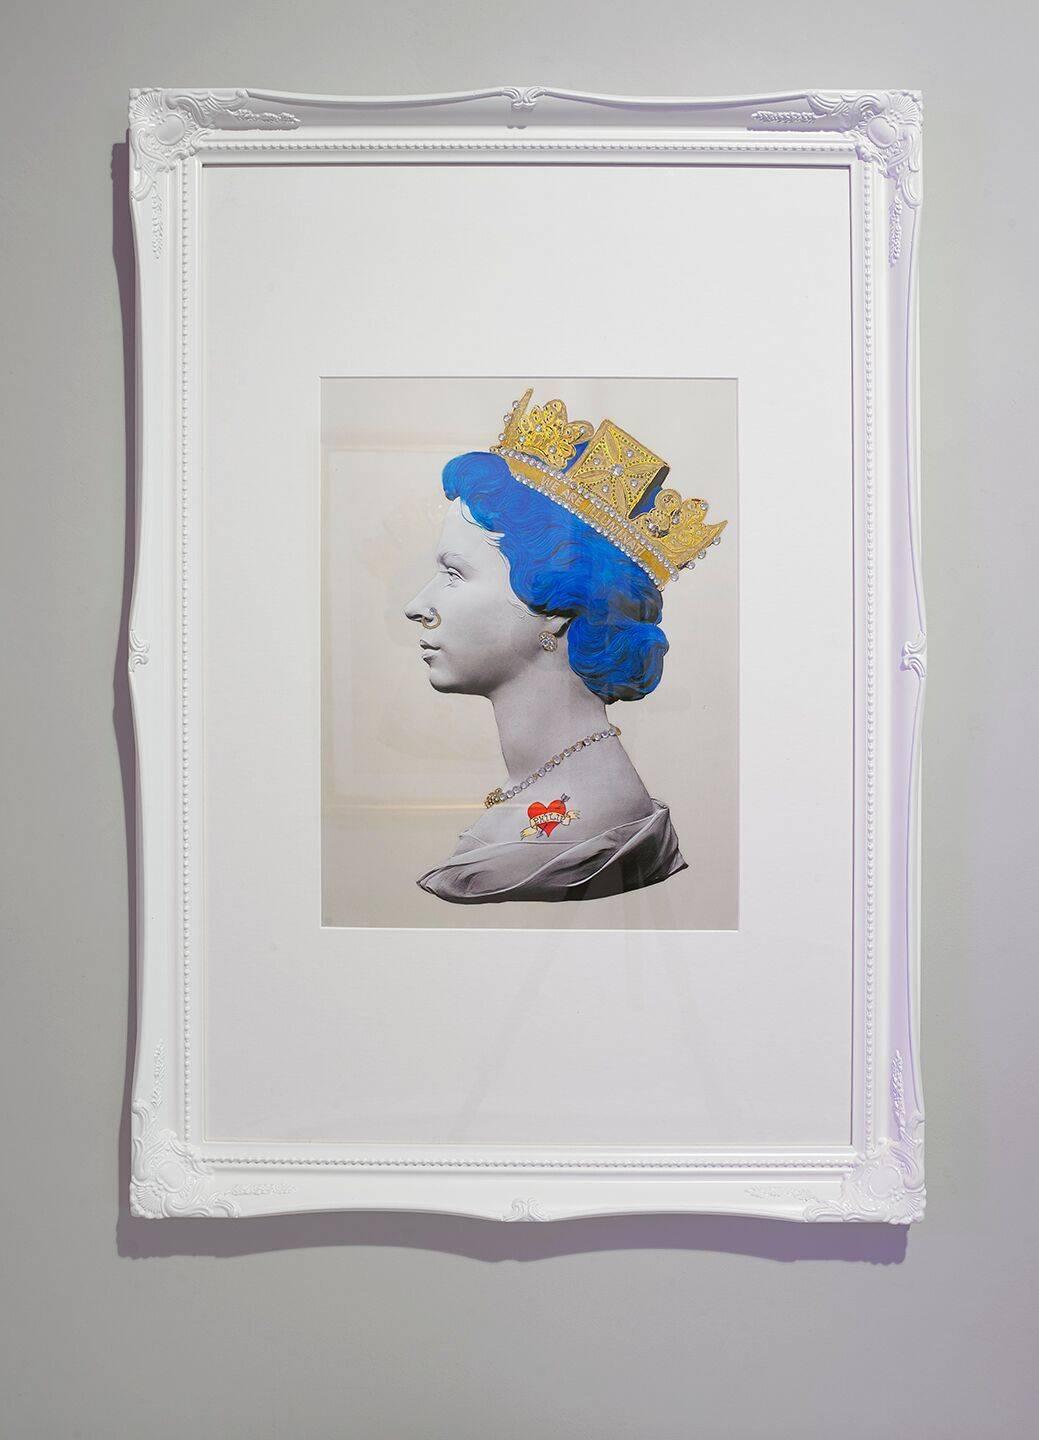 Small Baby Blue Queen Print Philip Tattoo Heart Gold Crown Limited Ed Print - Art by Mark Sloper